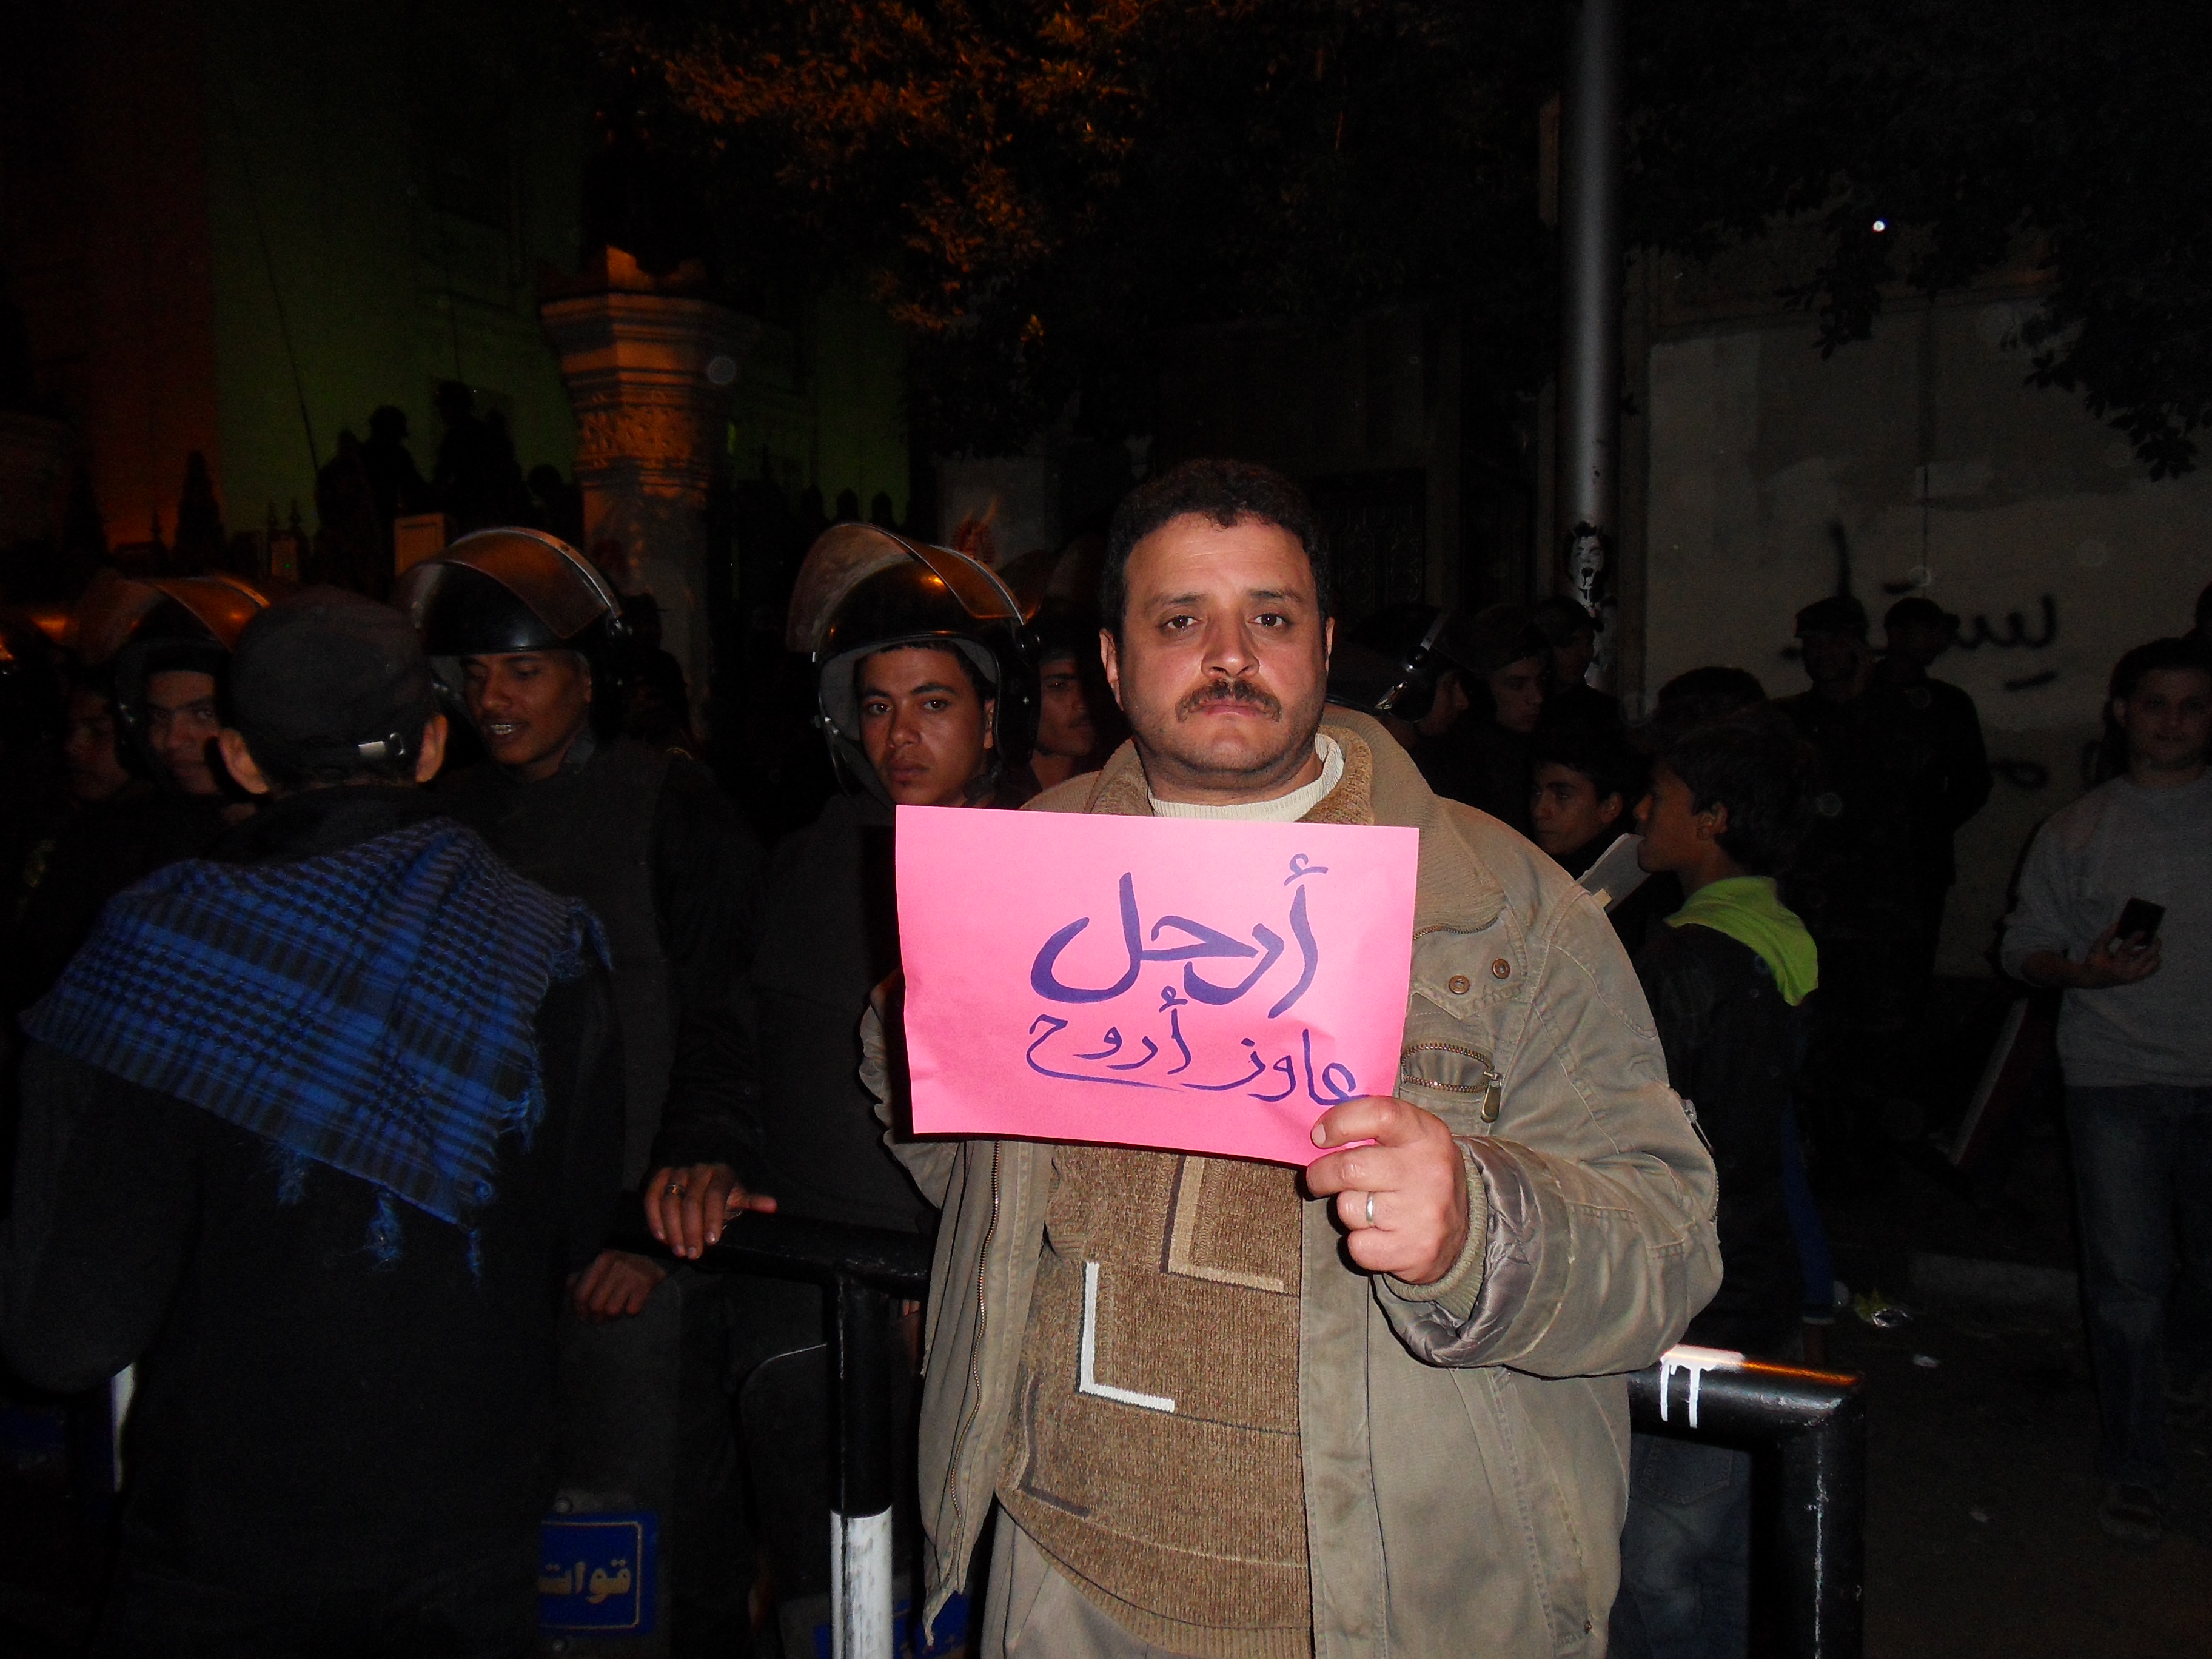 A protesters holding a sign that reads "Leave" while riot police stand behind him guarding the entrance to the Palace.